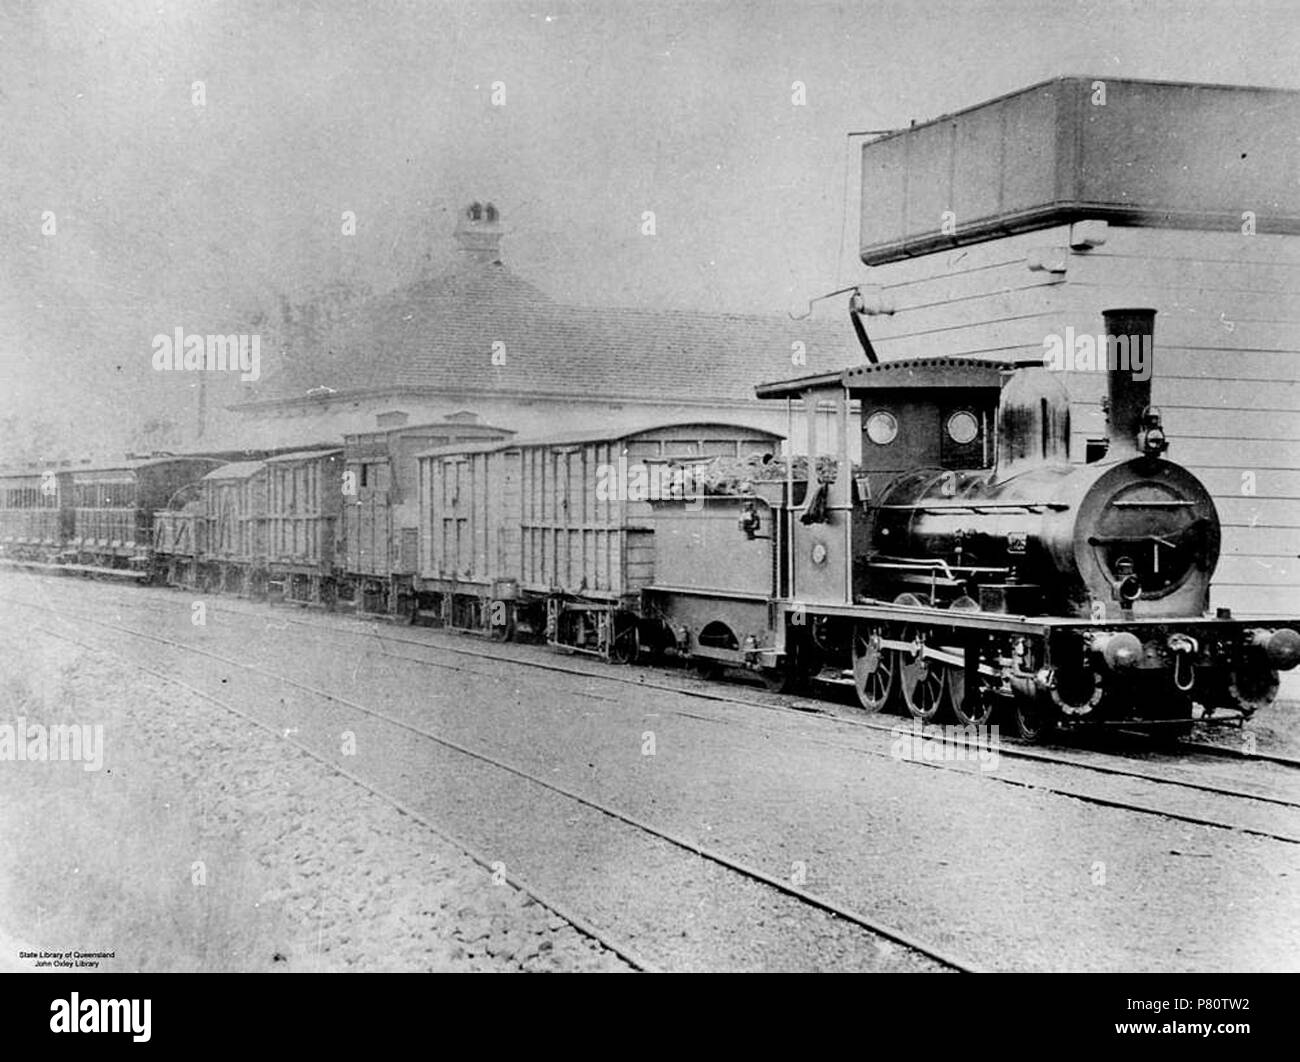 English: A steam train stopped at the Grandchester Railway Station, around 1879. 'The Grandchester Railway Station was built in 1866 and is the oldest station in Queensland and is listed by the National Trust. The colonial style building served as the station master's residence.' Information taken from: Grandchester State School, 2000, retrieved 10 January 2003, from www.grandchess.qld.edu.au . circa 1879 355 Steam train at Grandchester Railway Station, Queensland, ca. 1879 Stock Photo